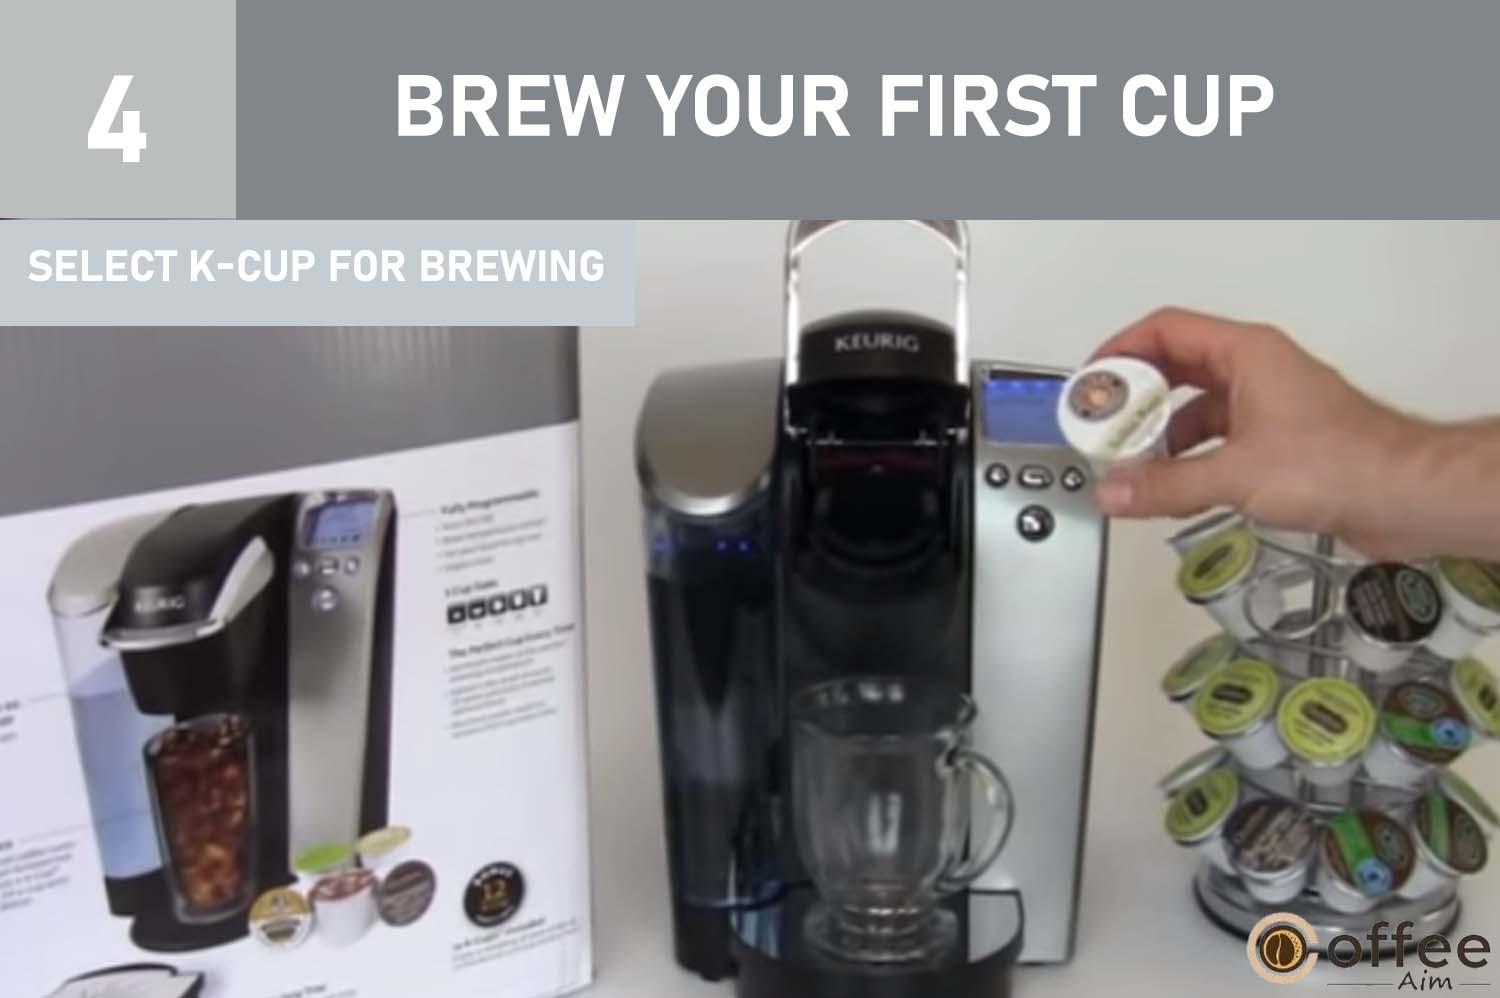 Select a K-Cup portion pack of your choice to use for brewing, offering a wide range of delicious coffee flavors and options for your perfect cup.